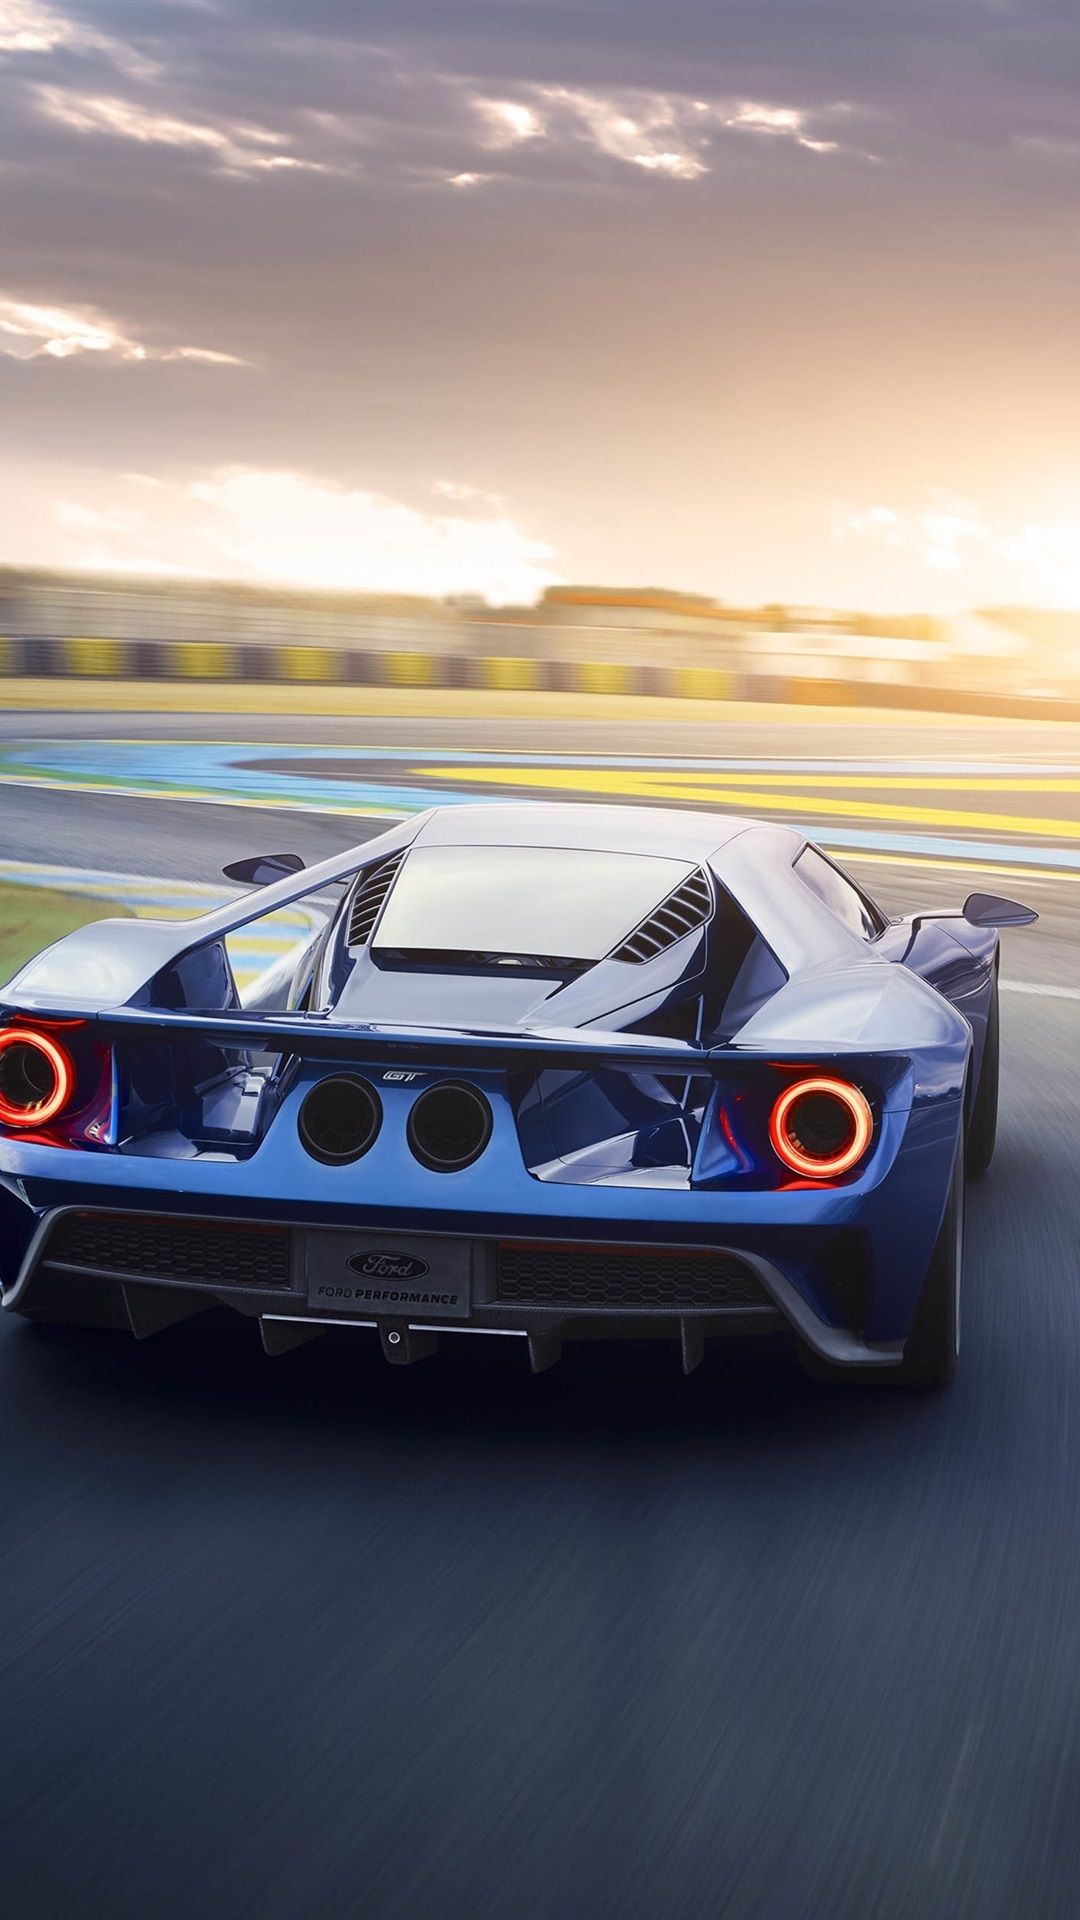 iPhone Wallpaper Ford Gt Ii Blue Supercar Back View